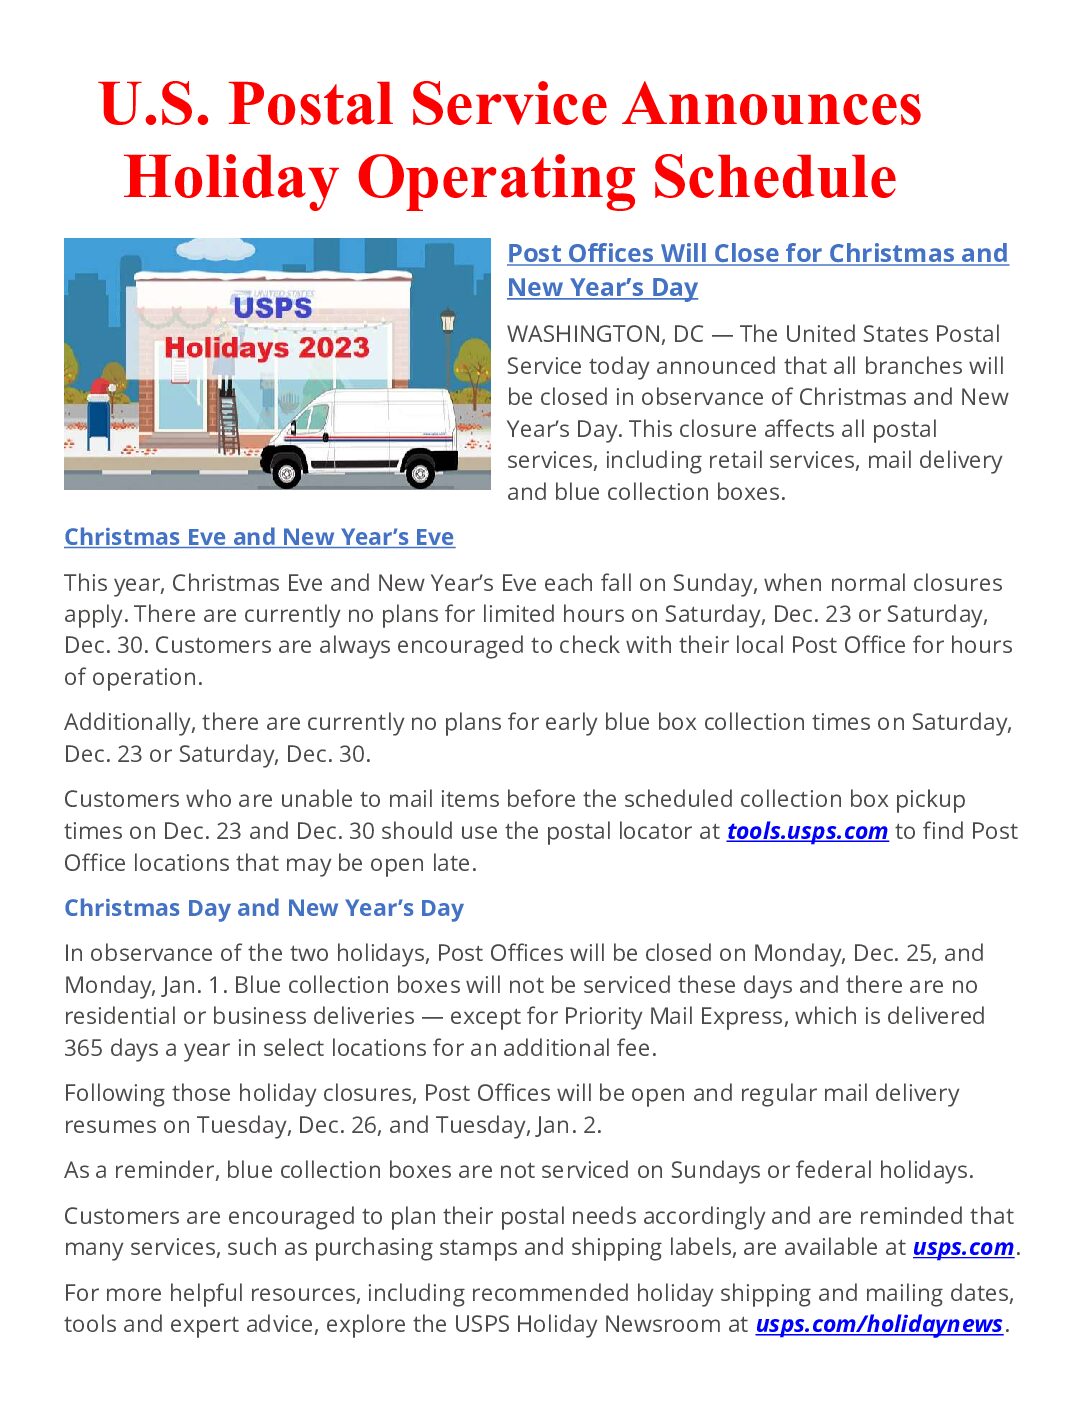 USPS Holiday Operating Hours - 